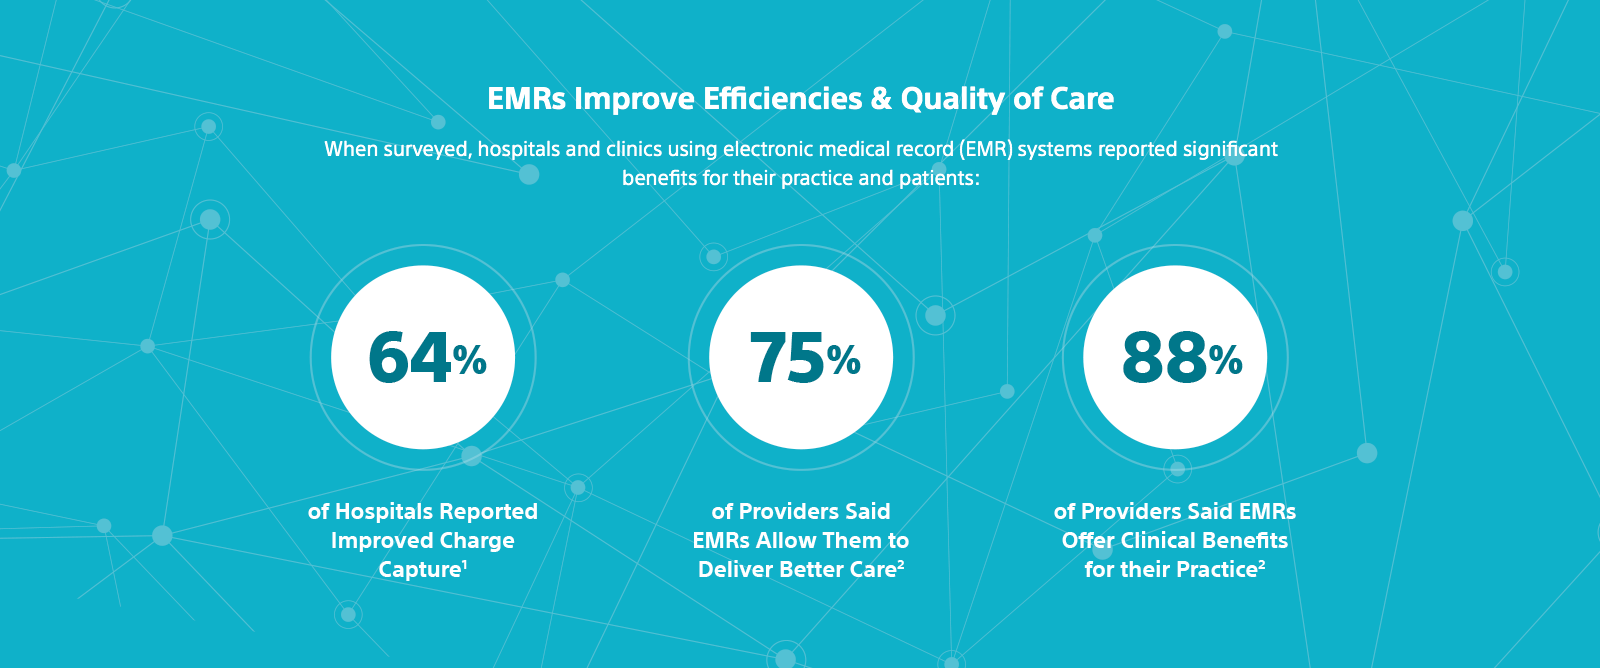 Graphics showing 64% of hospitals surveyed reported improved charge capture, 75% of providers surveyed said EMRs allow them to deliver better care, 88% of providers said EMRs offer clinical benefits for their practice.